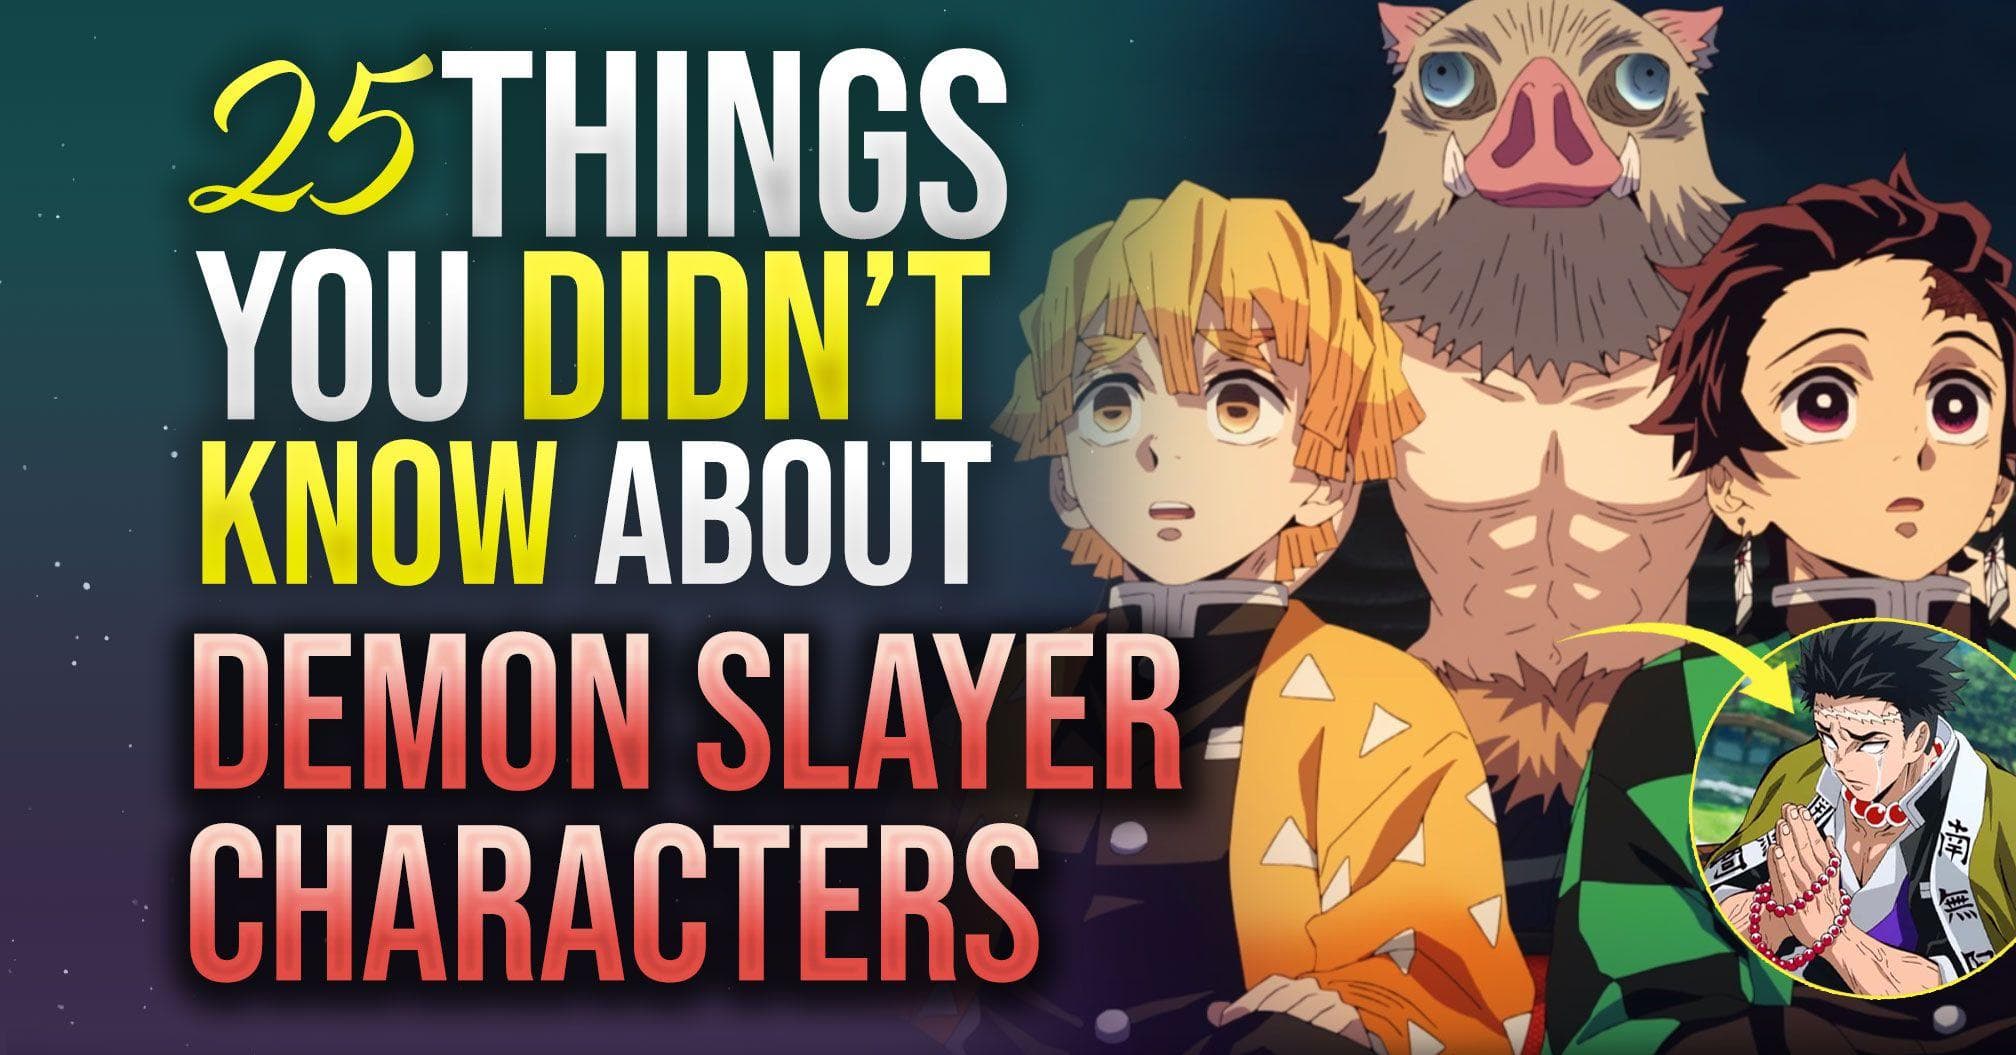 7 Things Demon Slayer Has Done That No Other Anime Has